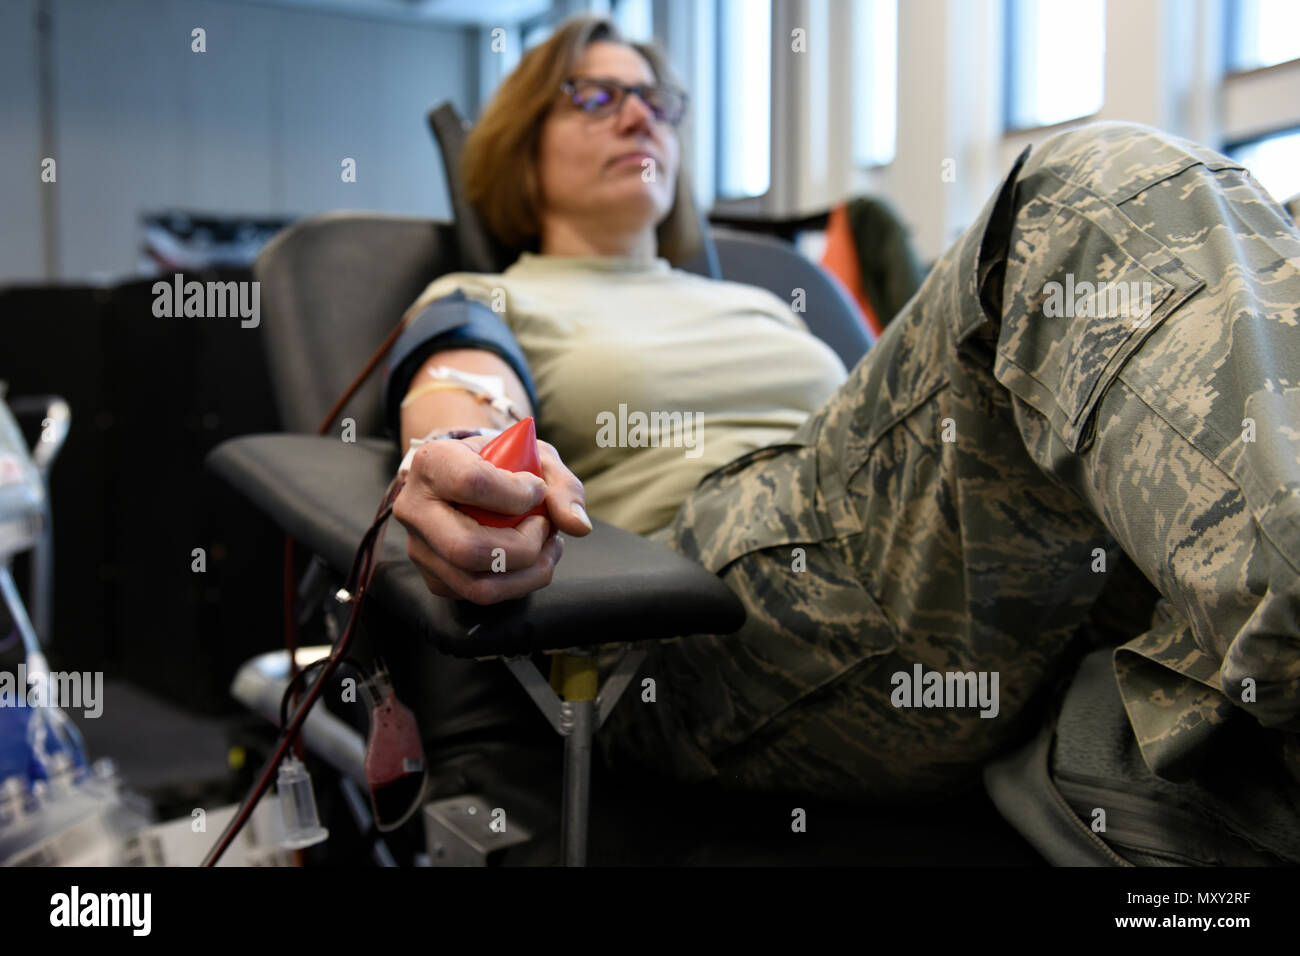 Master Sgt. Ann McCormick, the Management Internal Control Tool Self-Assessment Program Manager assigned to the 180th Fighter Wing, gives a double red cell donation at the American Red Cross blood drive in Swanton, Ohio Dec. 14, 2016. Donating blood is one of the ways our Airmen strive to give more to the community than given. Stock Photo